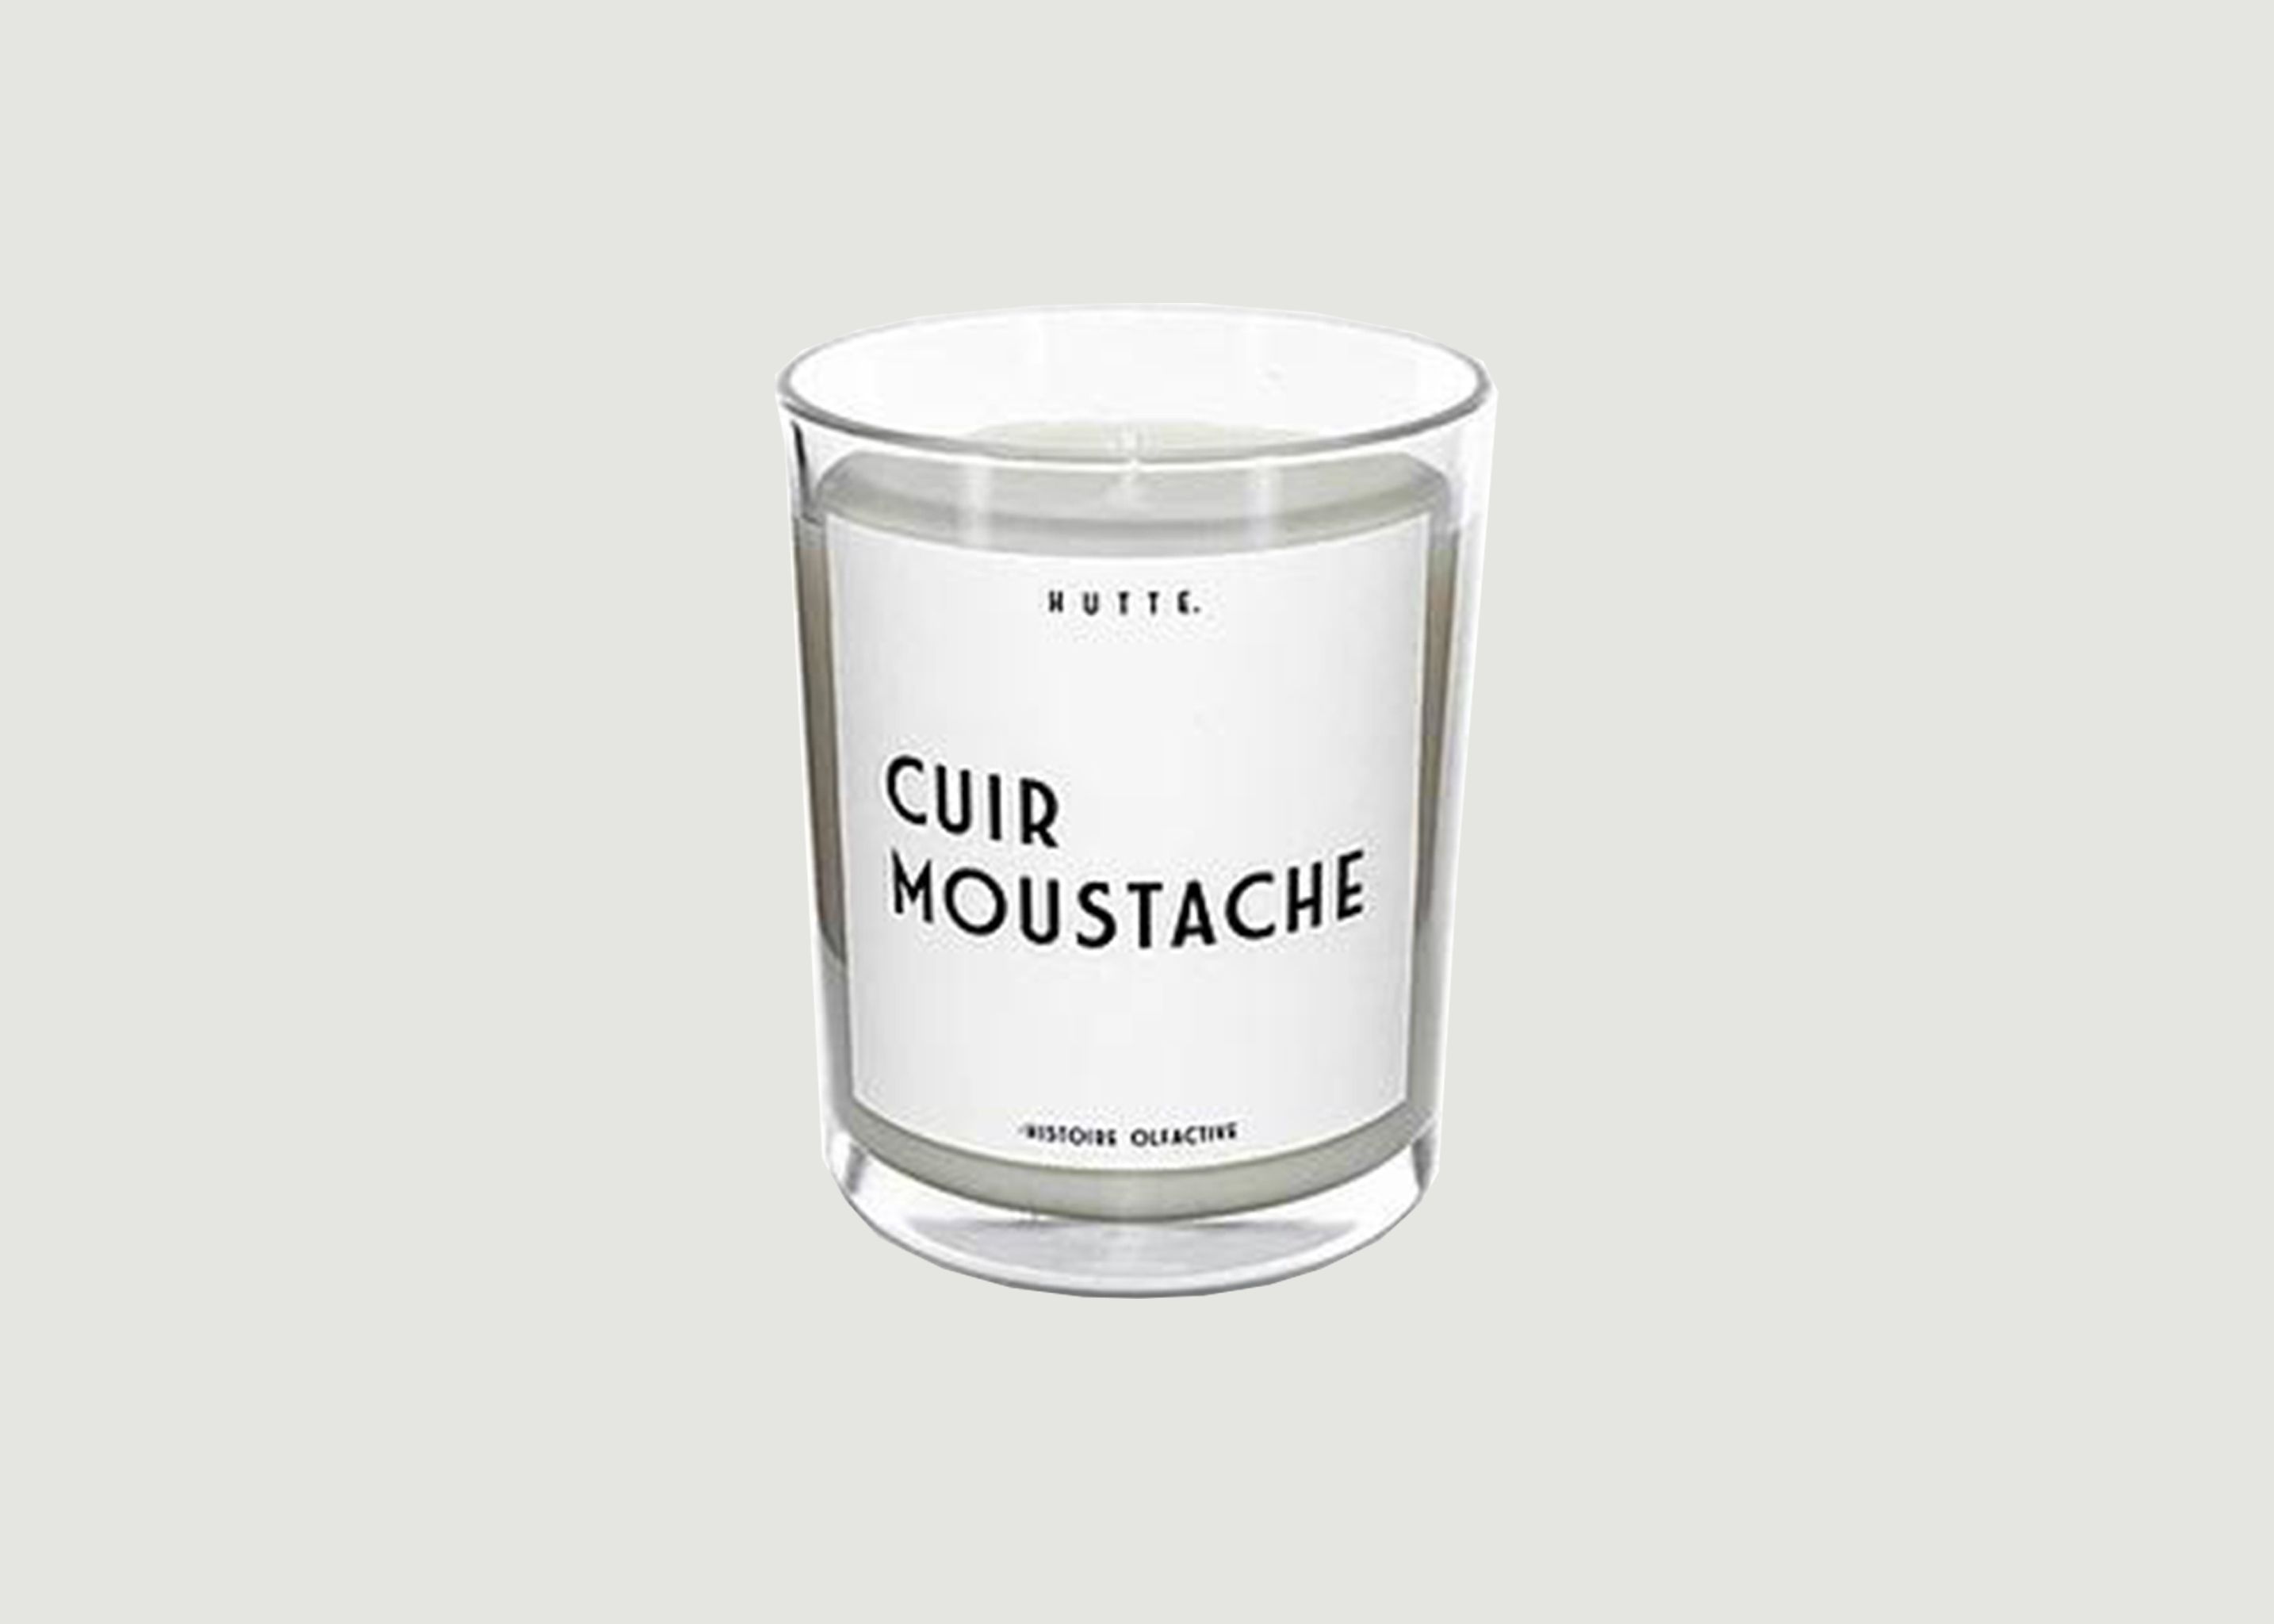 Scented candle Leather mustache - Hutte